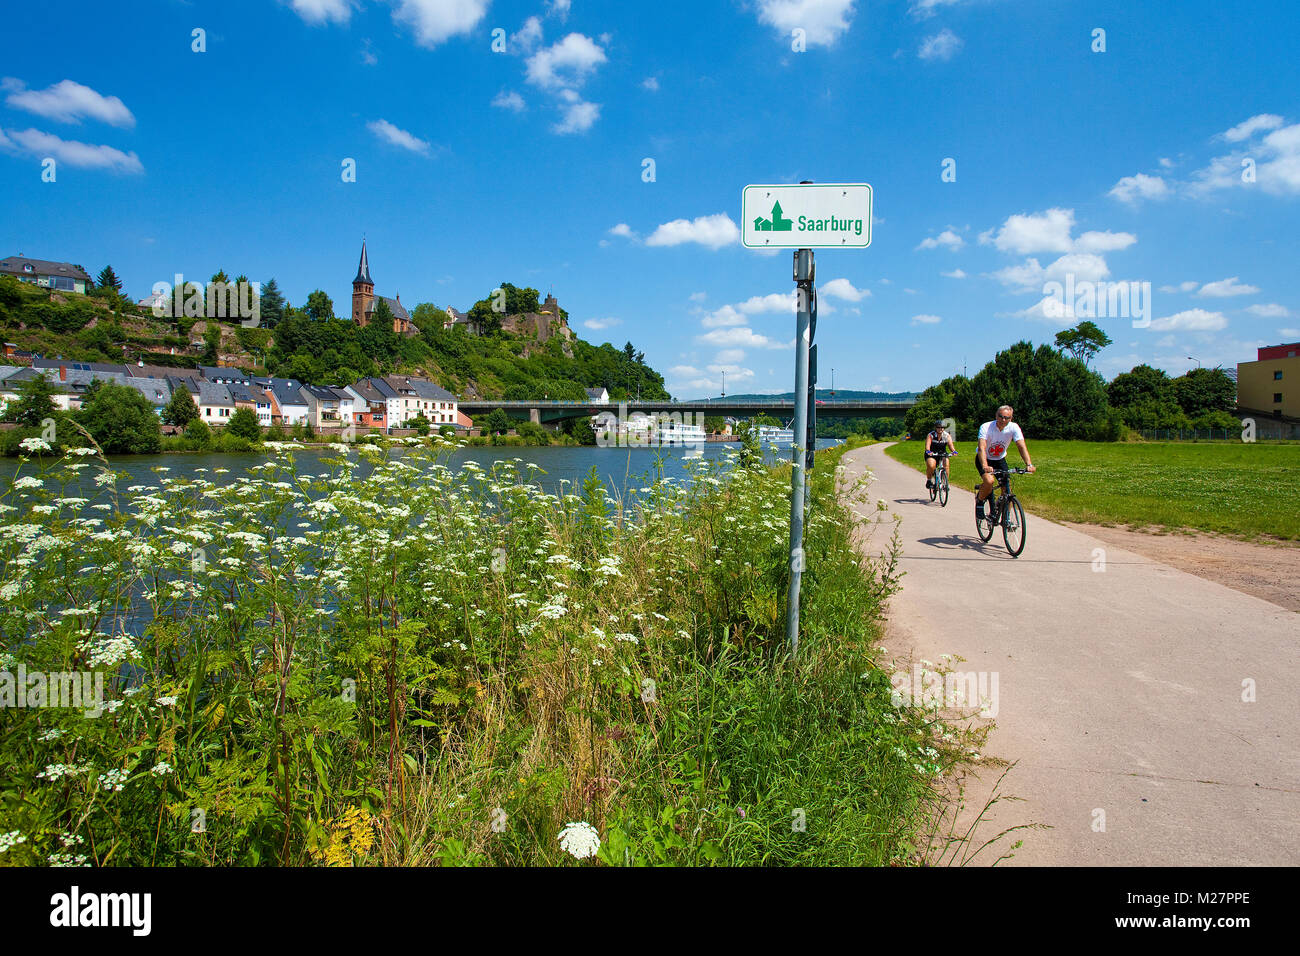 Cyclists on cycleway at riverside, place name sign of Saarburg at the Saar river, Rhineland-Palatinate, Germany, Europe Stock Photo